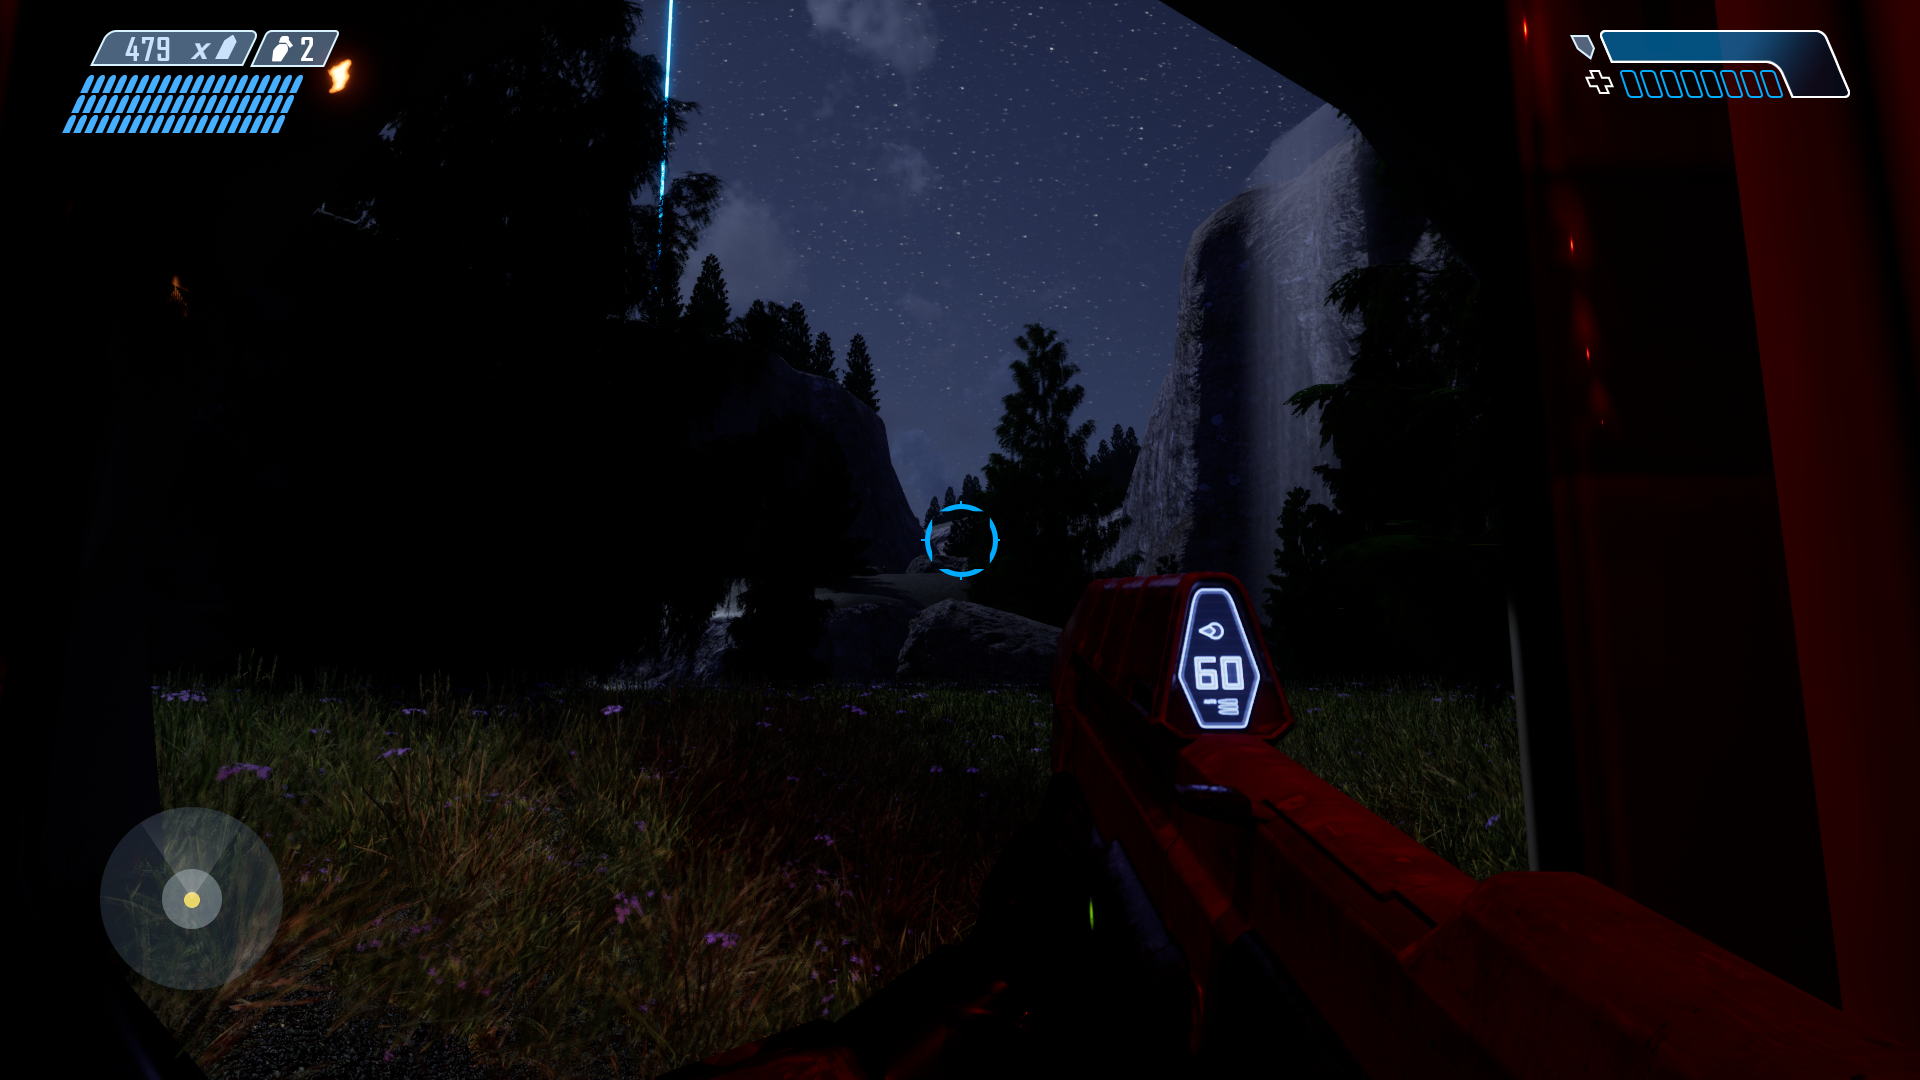 You can download and play a remake of Halo: Combat Evolved's Halo level in  Unreal Engine 5